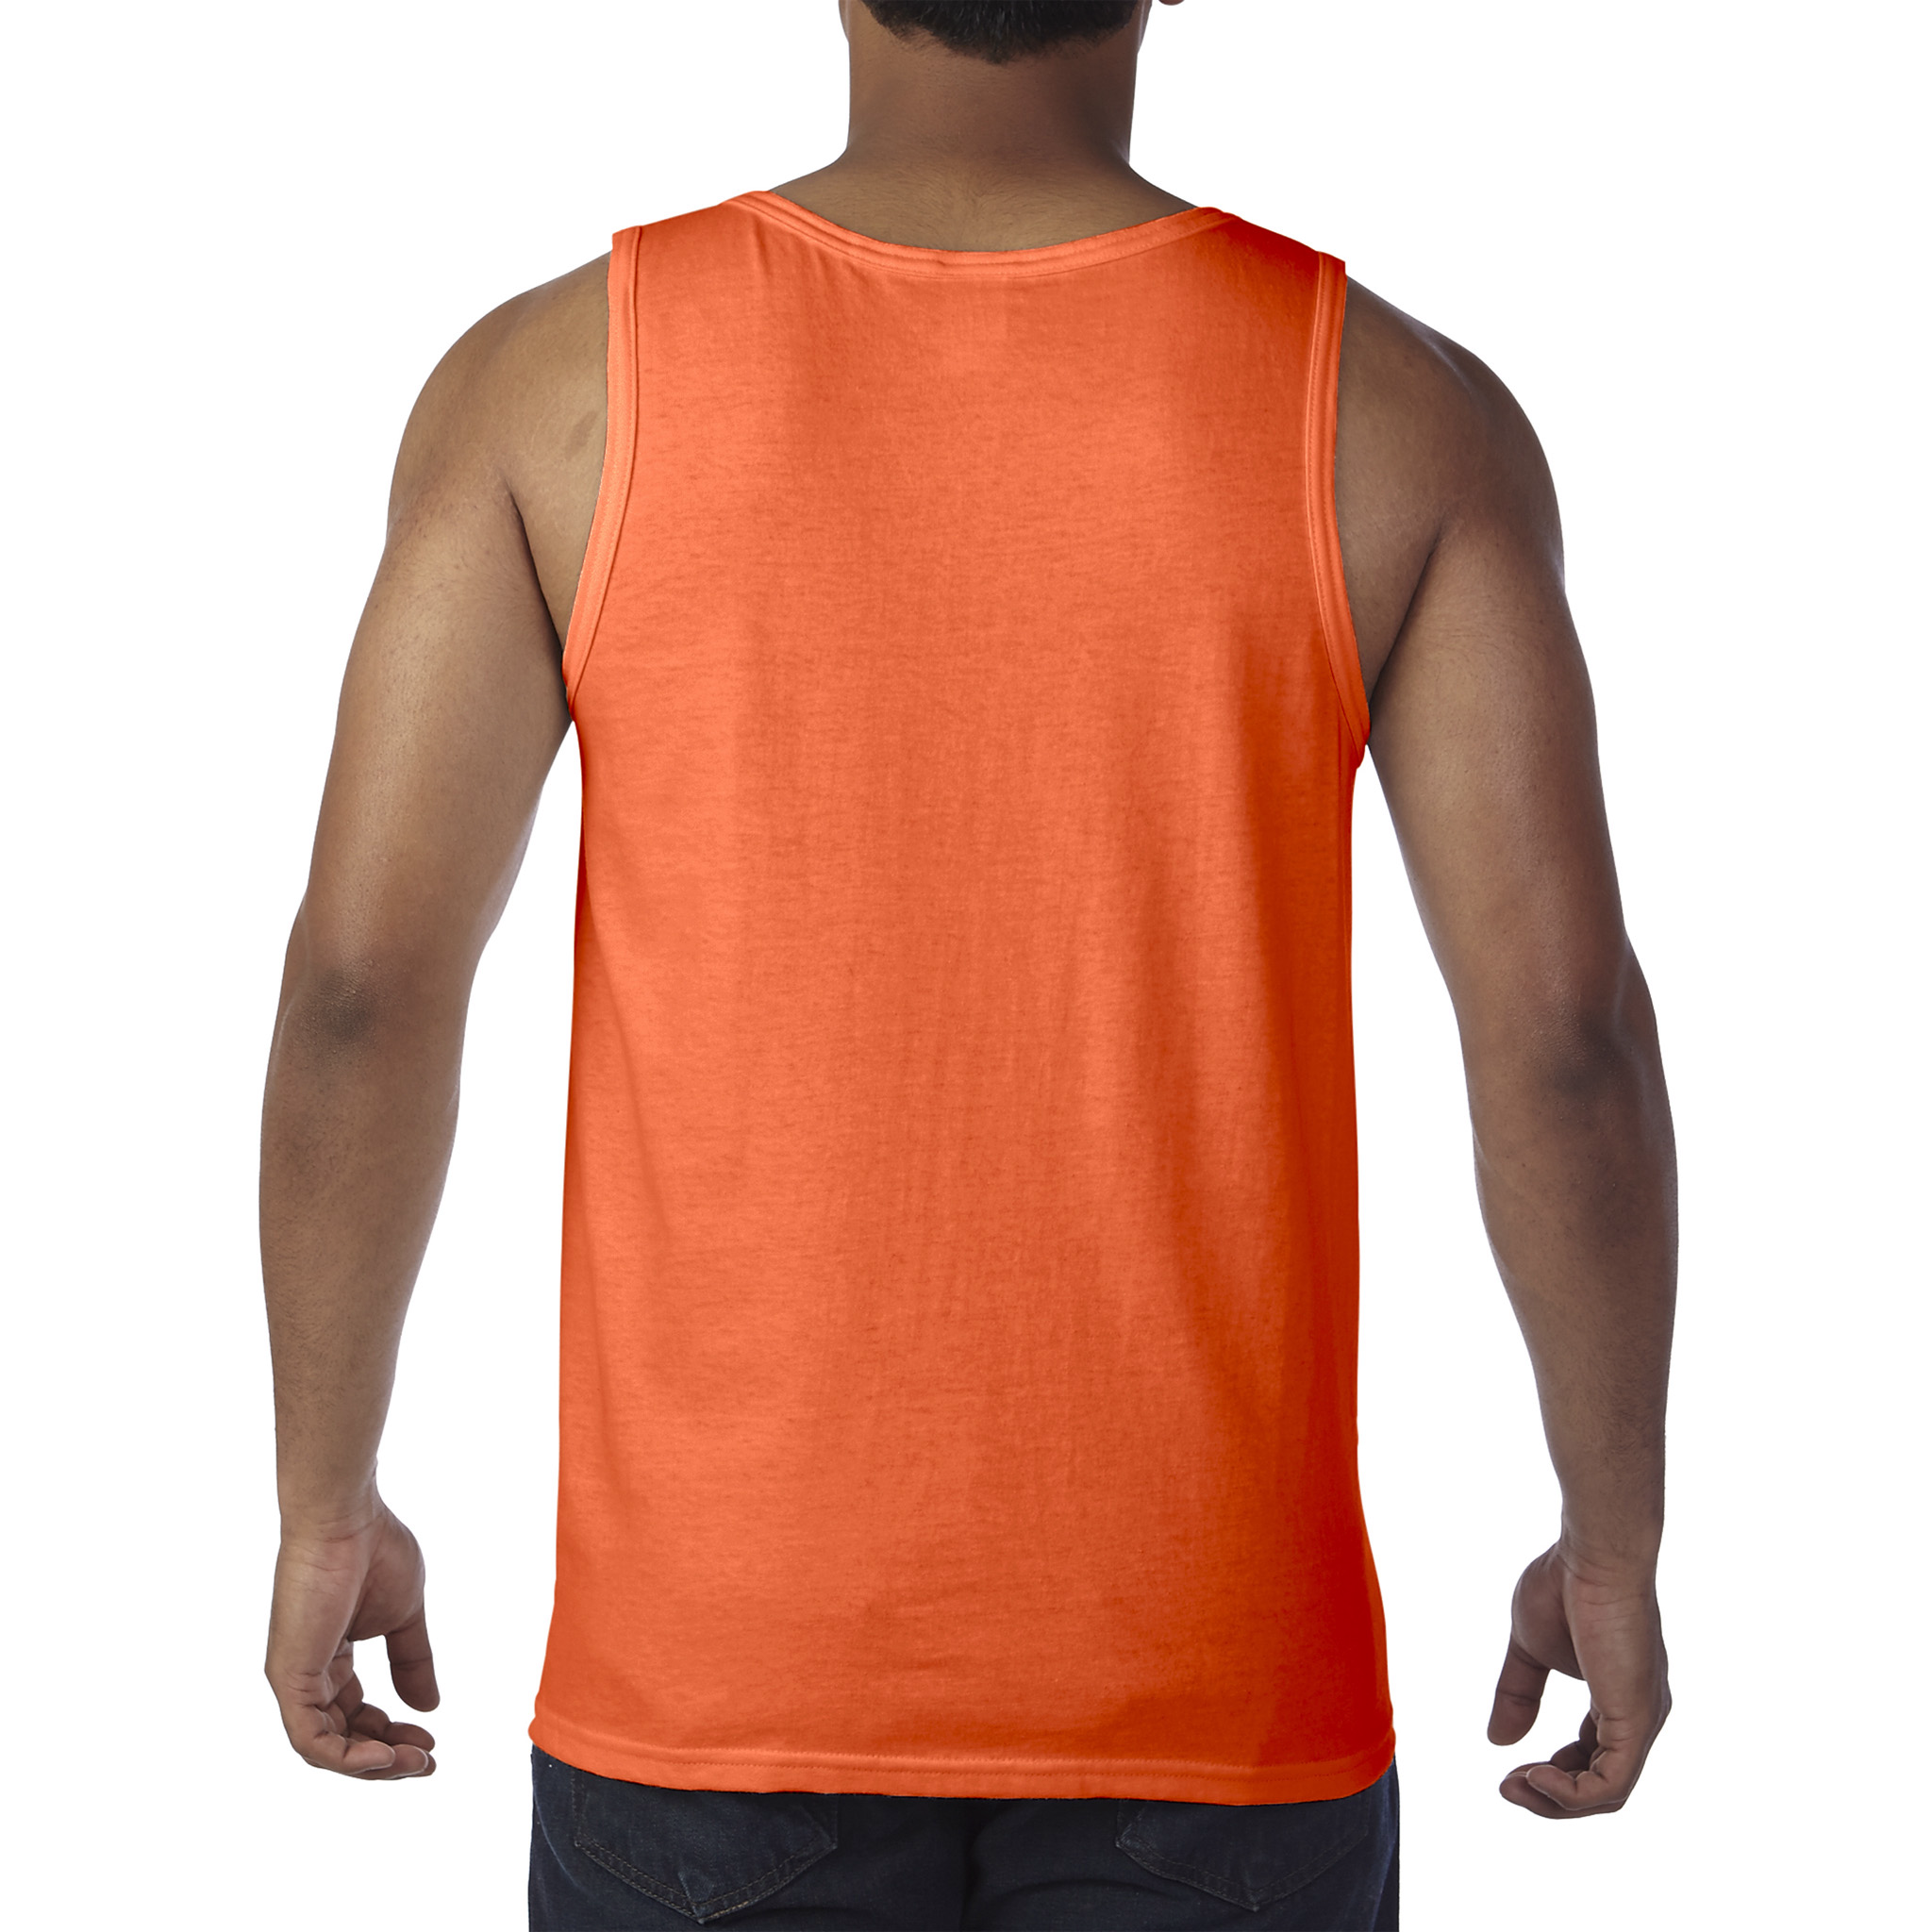 FerociTees Me So Thorny Funny Romance and Valentines Day Jersey Tank Top for Men